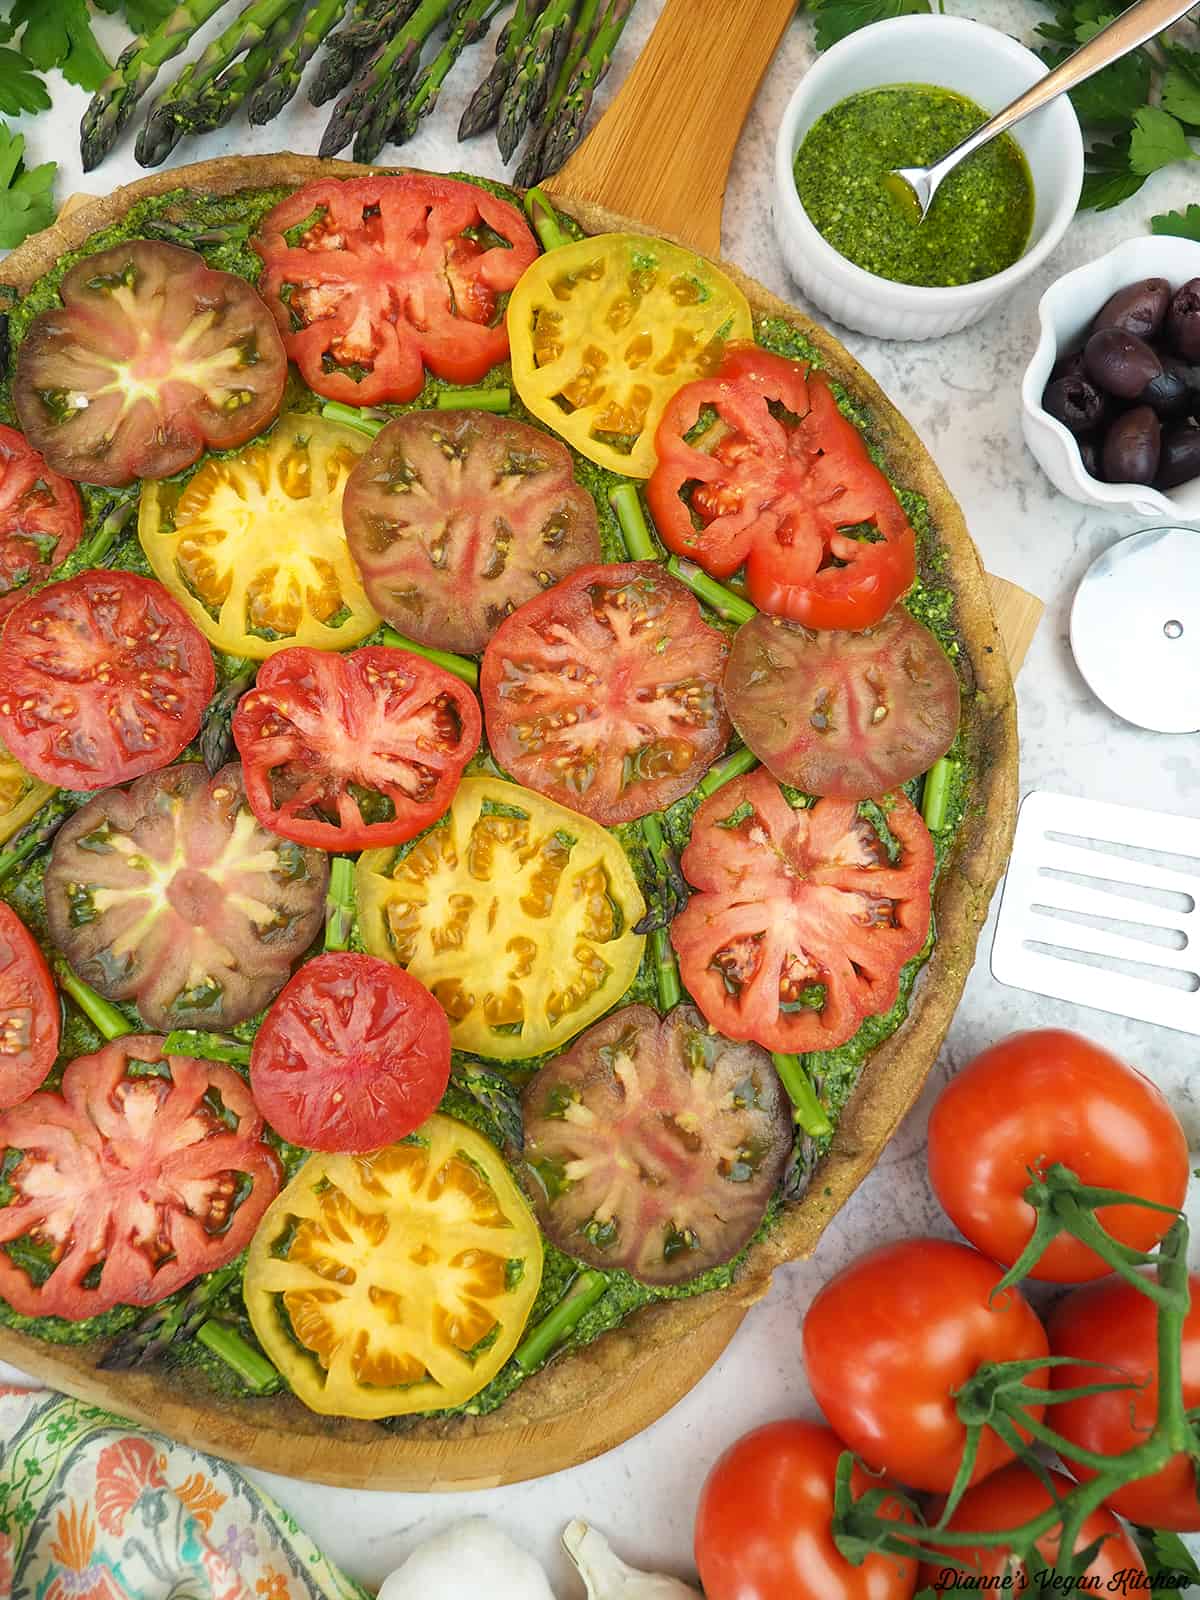 Grilled Pesto Tart with Tomatoes with tomatoes, pesto, olives, garlic, and asparagus